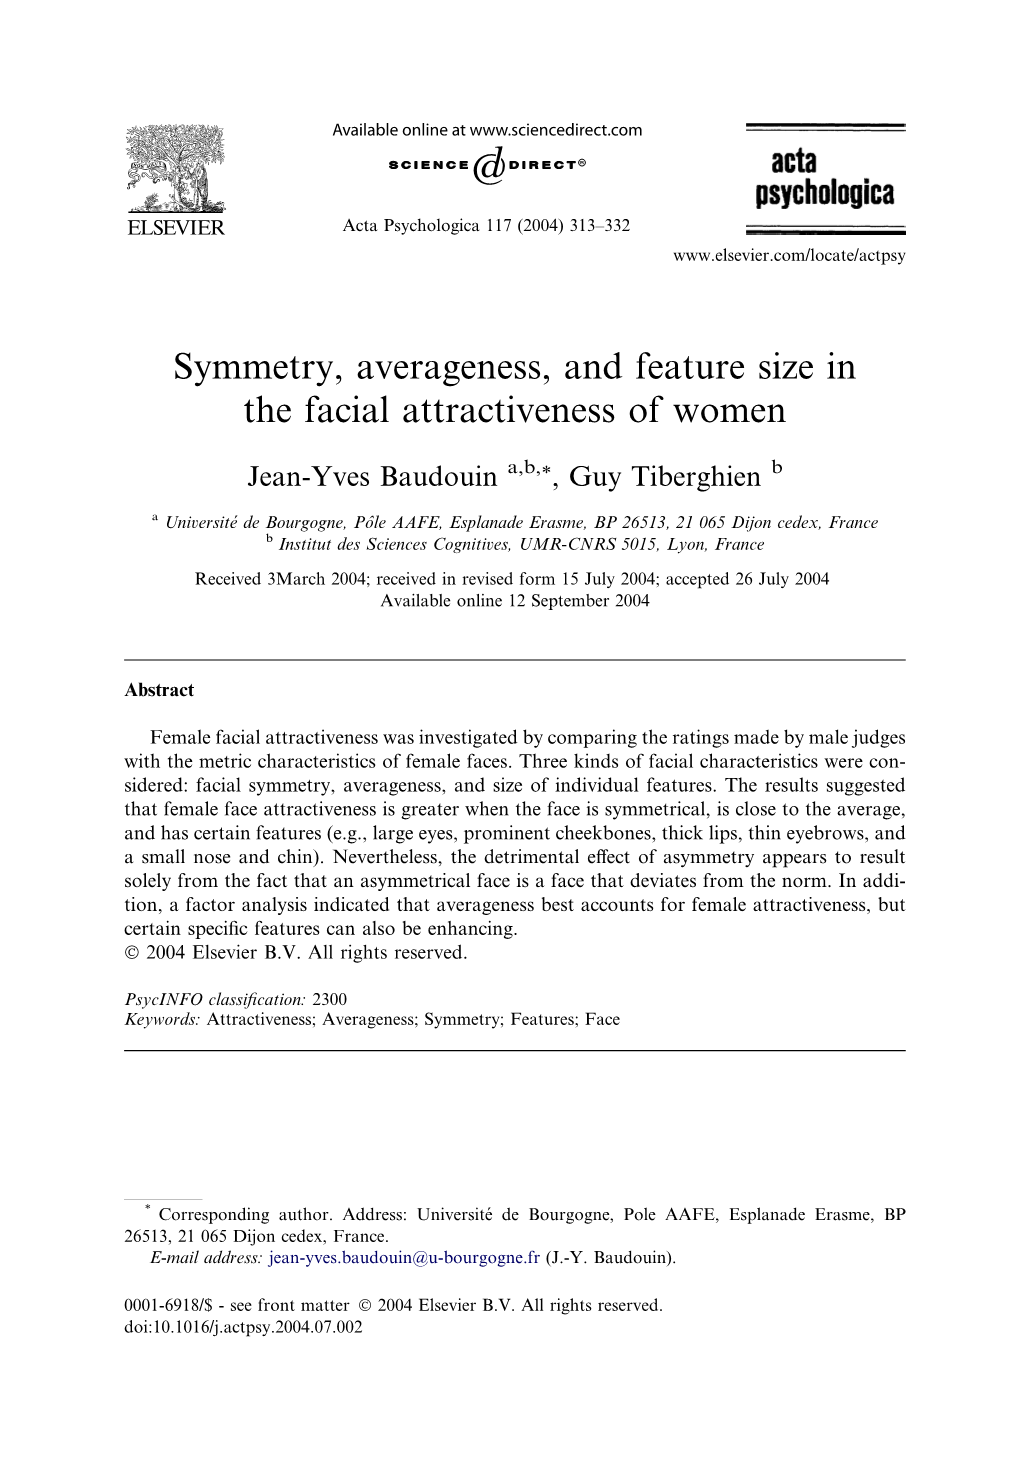 Symmetry, Averageness, and Feature Size in the Facial Attractiveness of Women